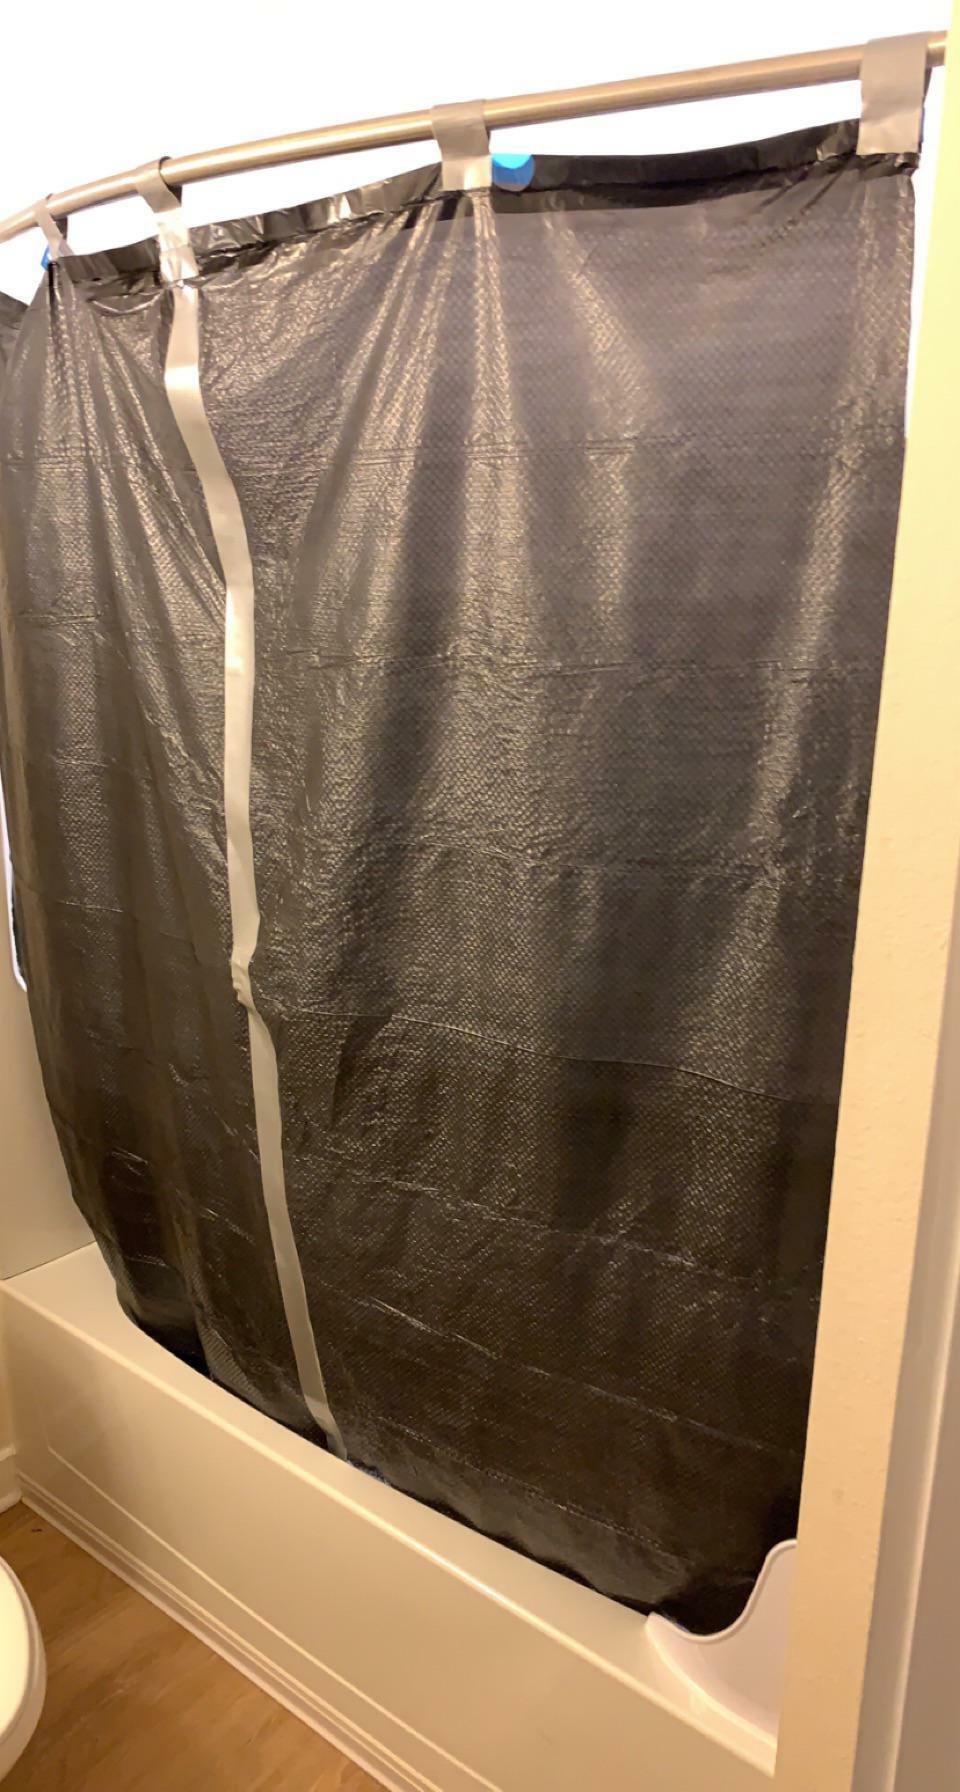 I Forgot To Buy A Shower Curtain For The New Apartment, And I Can't Get One Until Tomorrow Evening. Two Trash Bags Were Cut Open, And An Amount Of Duct Tap